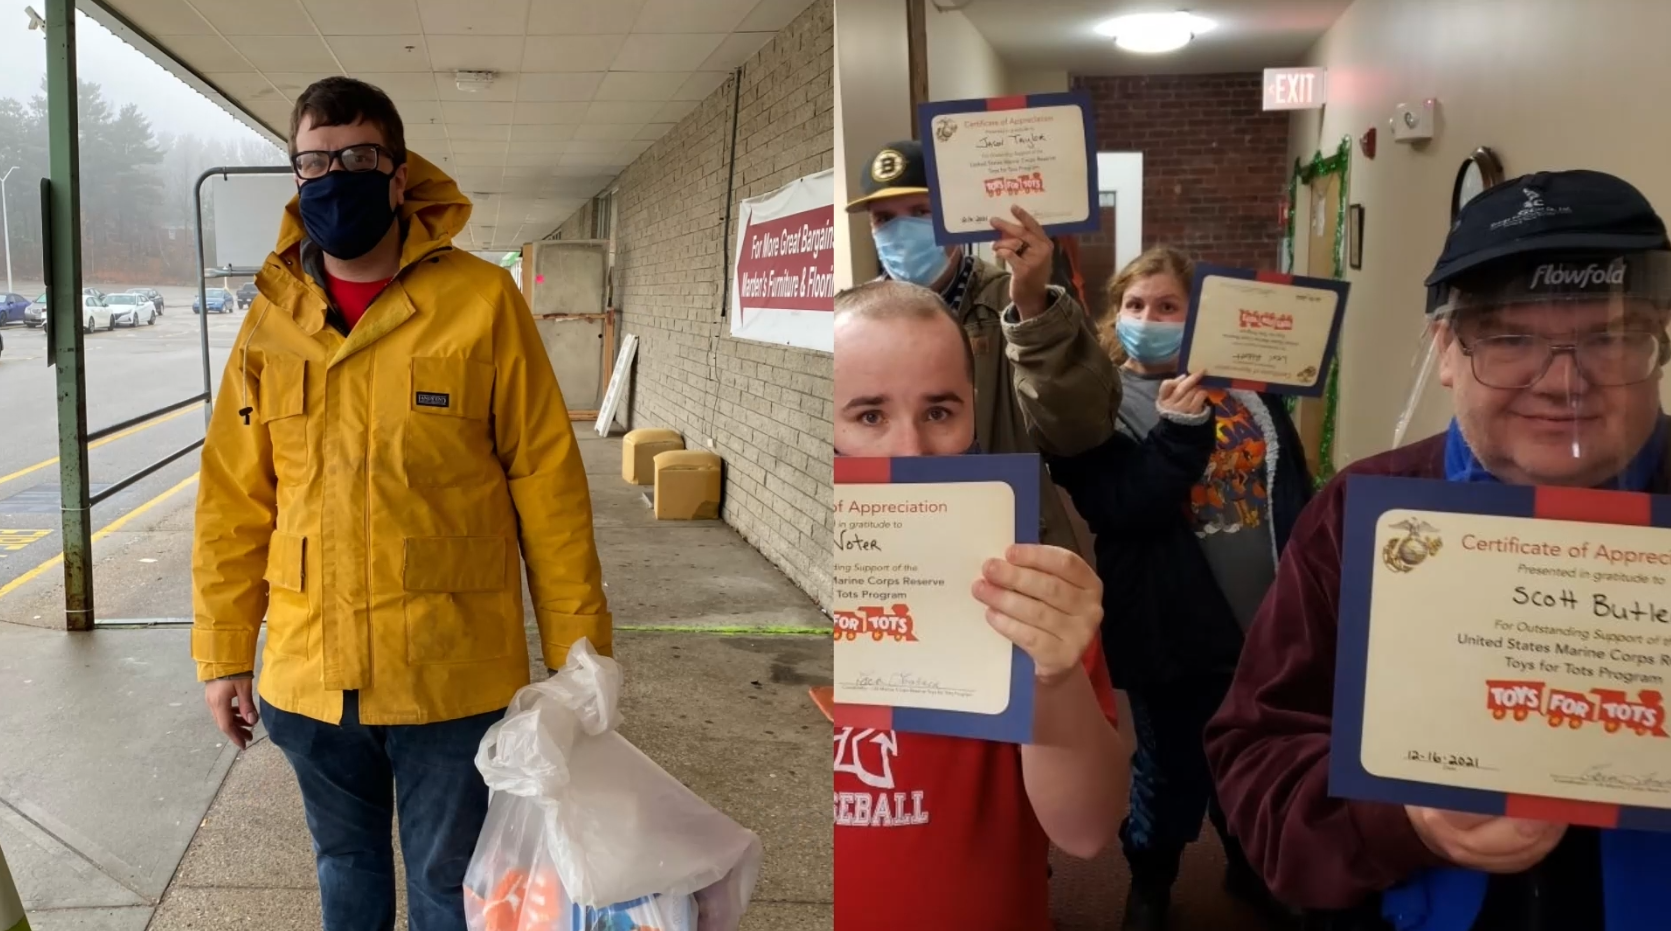 Collage of two photos of individuals participating in toys for tots drives. Photo on left is a portrait of one individual holding a bag of toys outdoors. Photo on right is a group of four individuals holding up certificates while posing for a photo in the hallway.